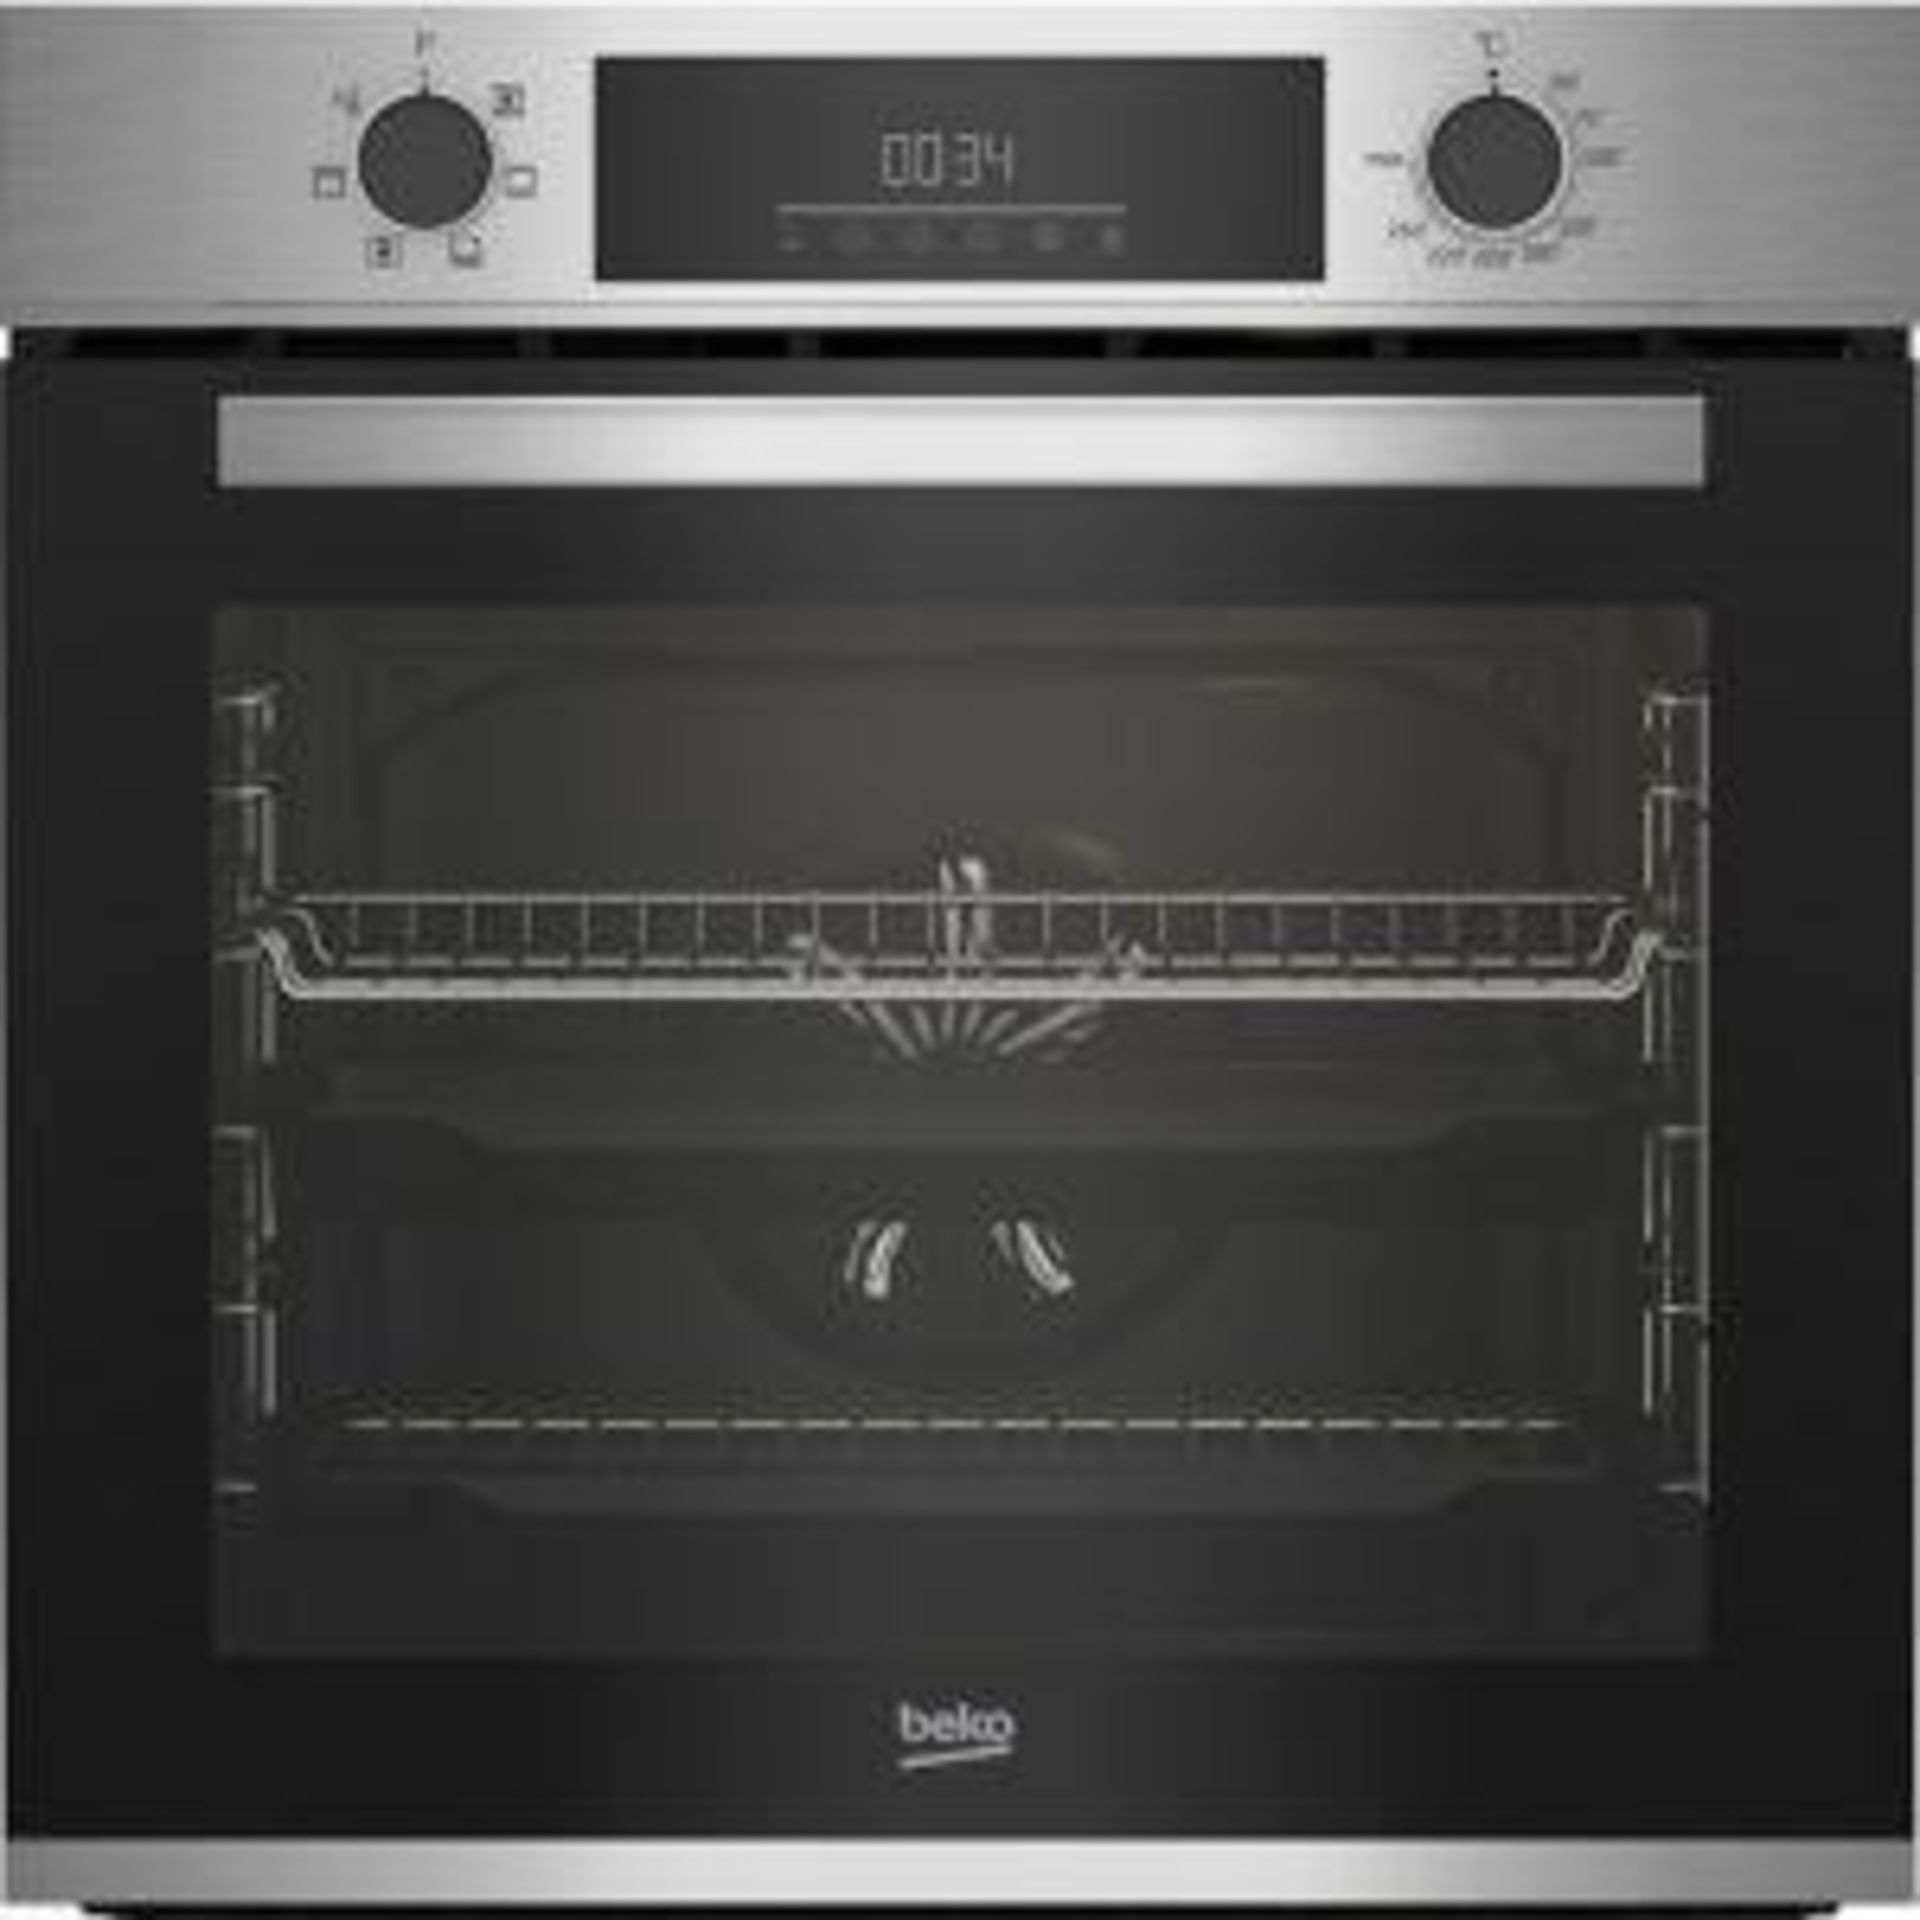 Beko Bbqe22300X Built-in Single Multifunction Oven - Stainless Steel - SR4. Bake perfect cupcakes,